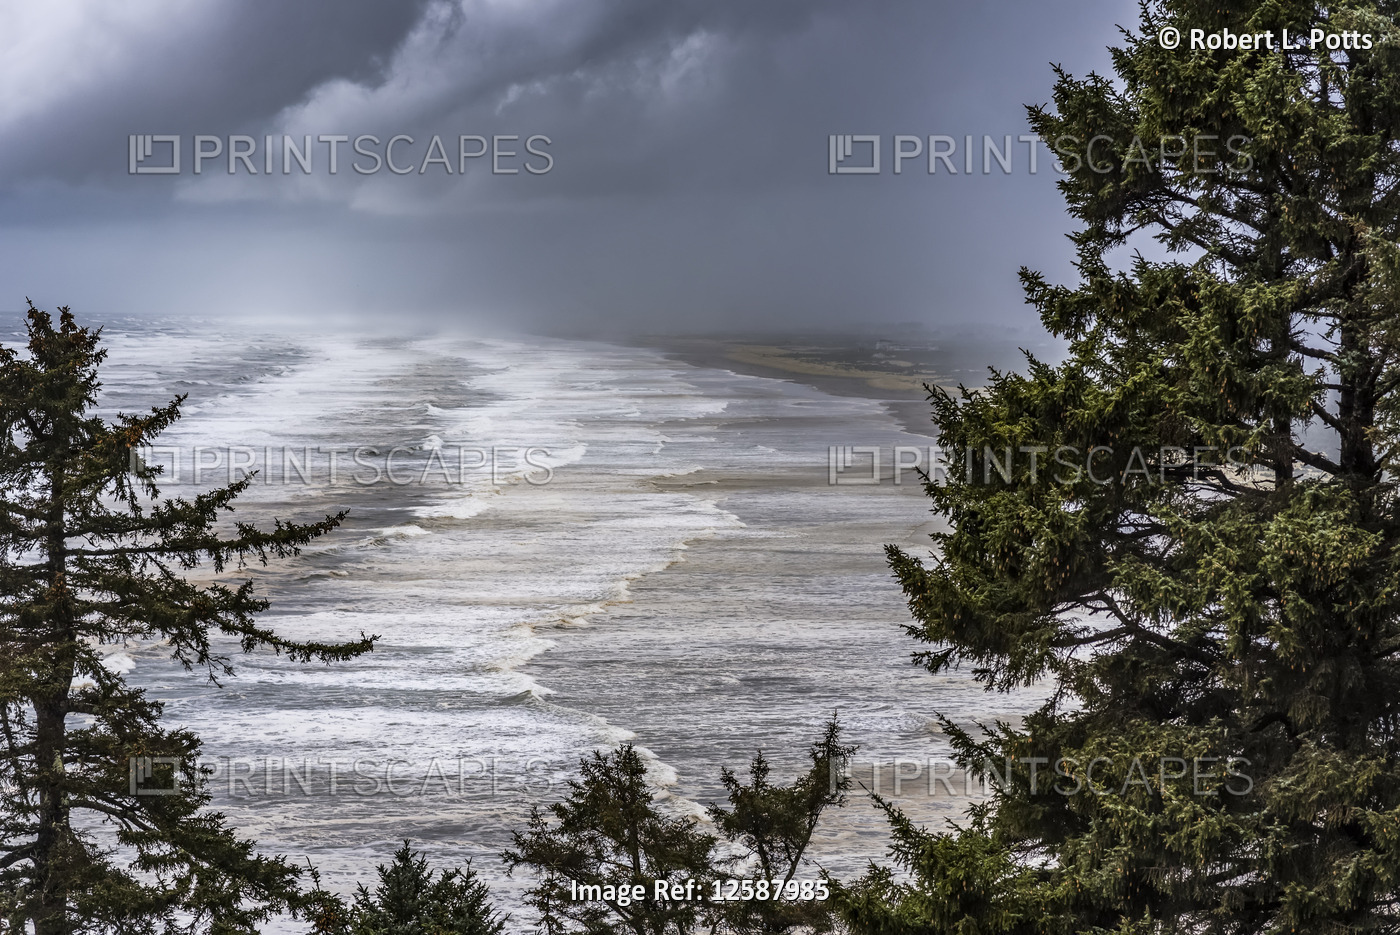 A storm moves in over the Long Beach Peninsula in Washington's Cape ...